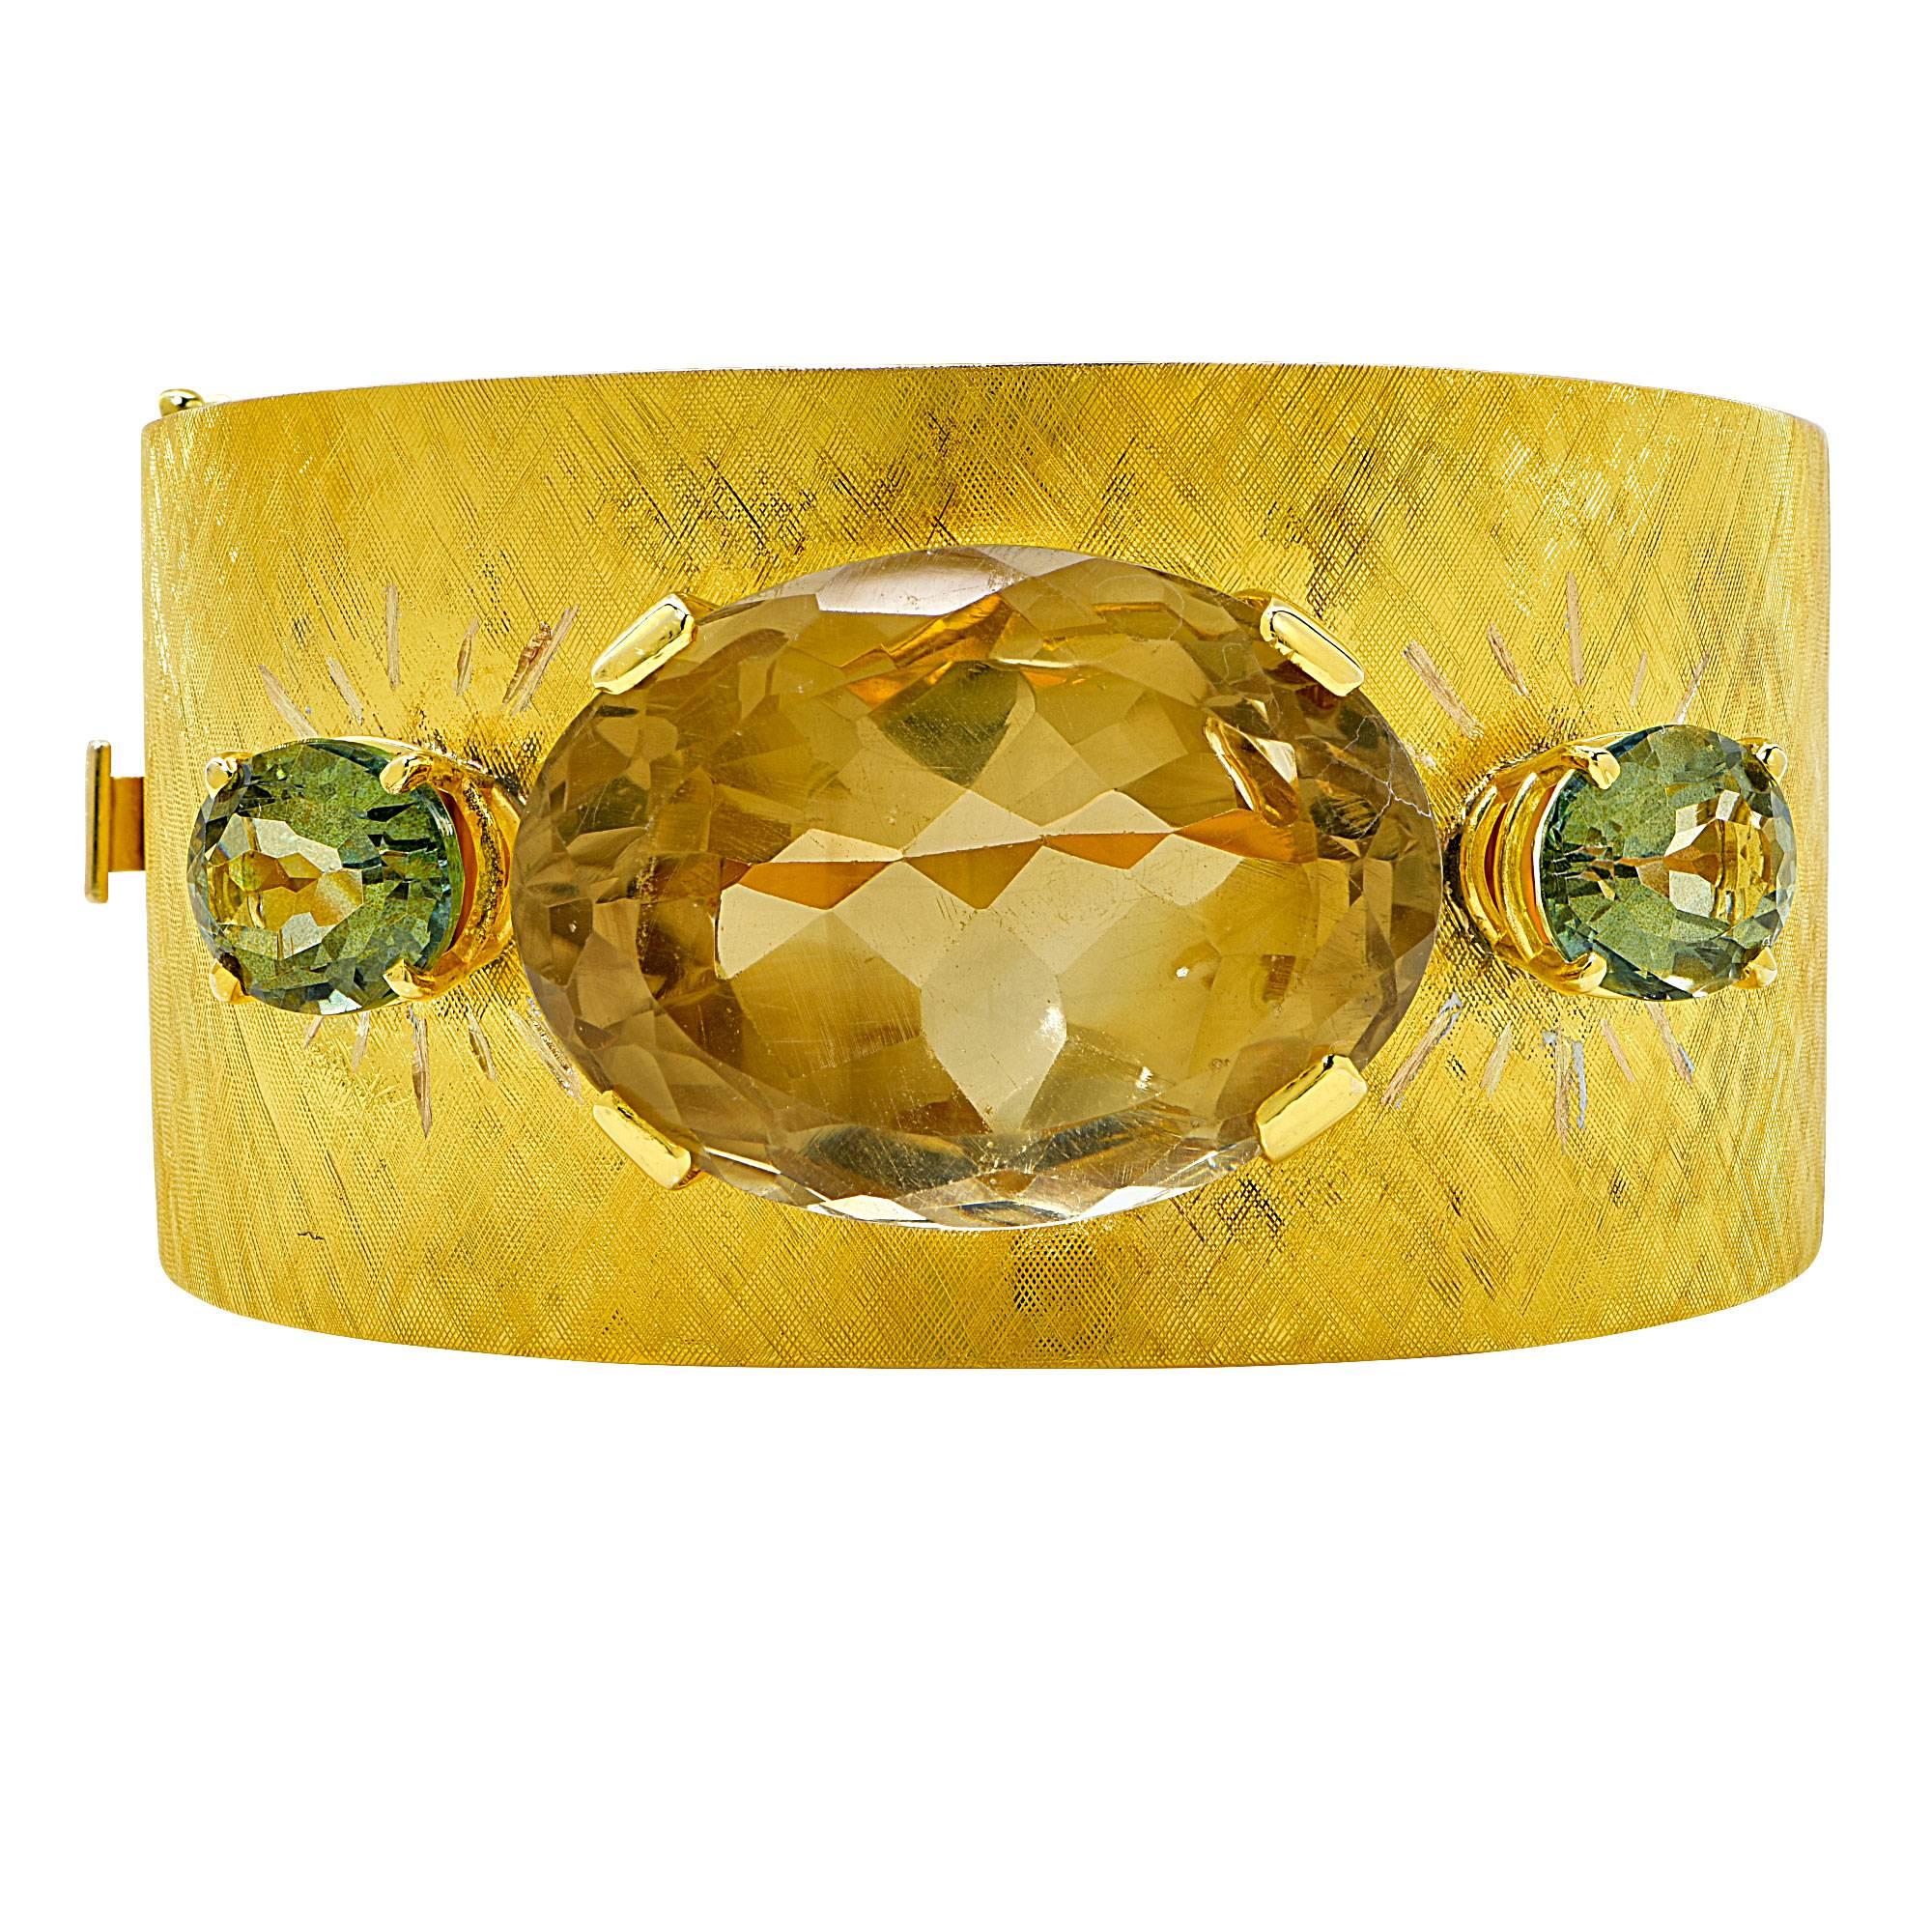 14k yellow gold bangle featuring an oval cut Smokey Quartz weighing approximately 80cts total accented by 2 oval cut green tourmaline weighing approximately 8cts total.

The bracelet measures 36.5mm wide
It is stamped and tested as 14k gold.
The